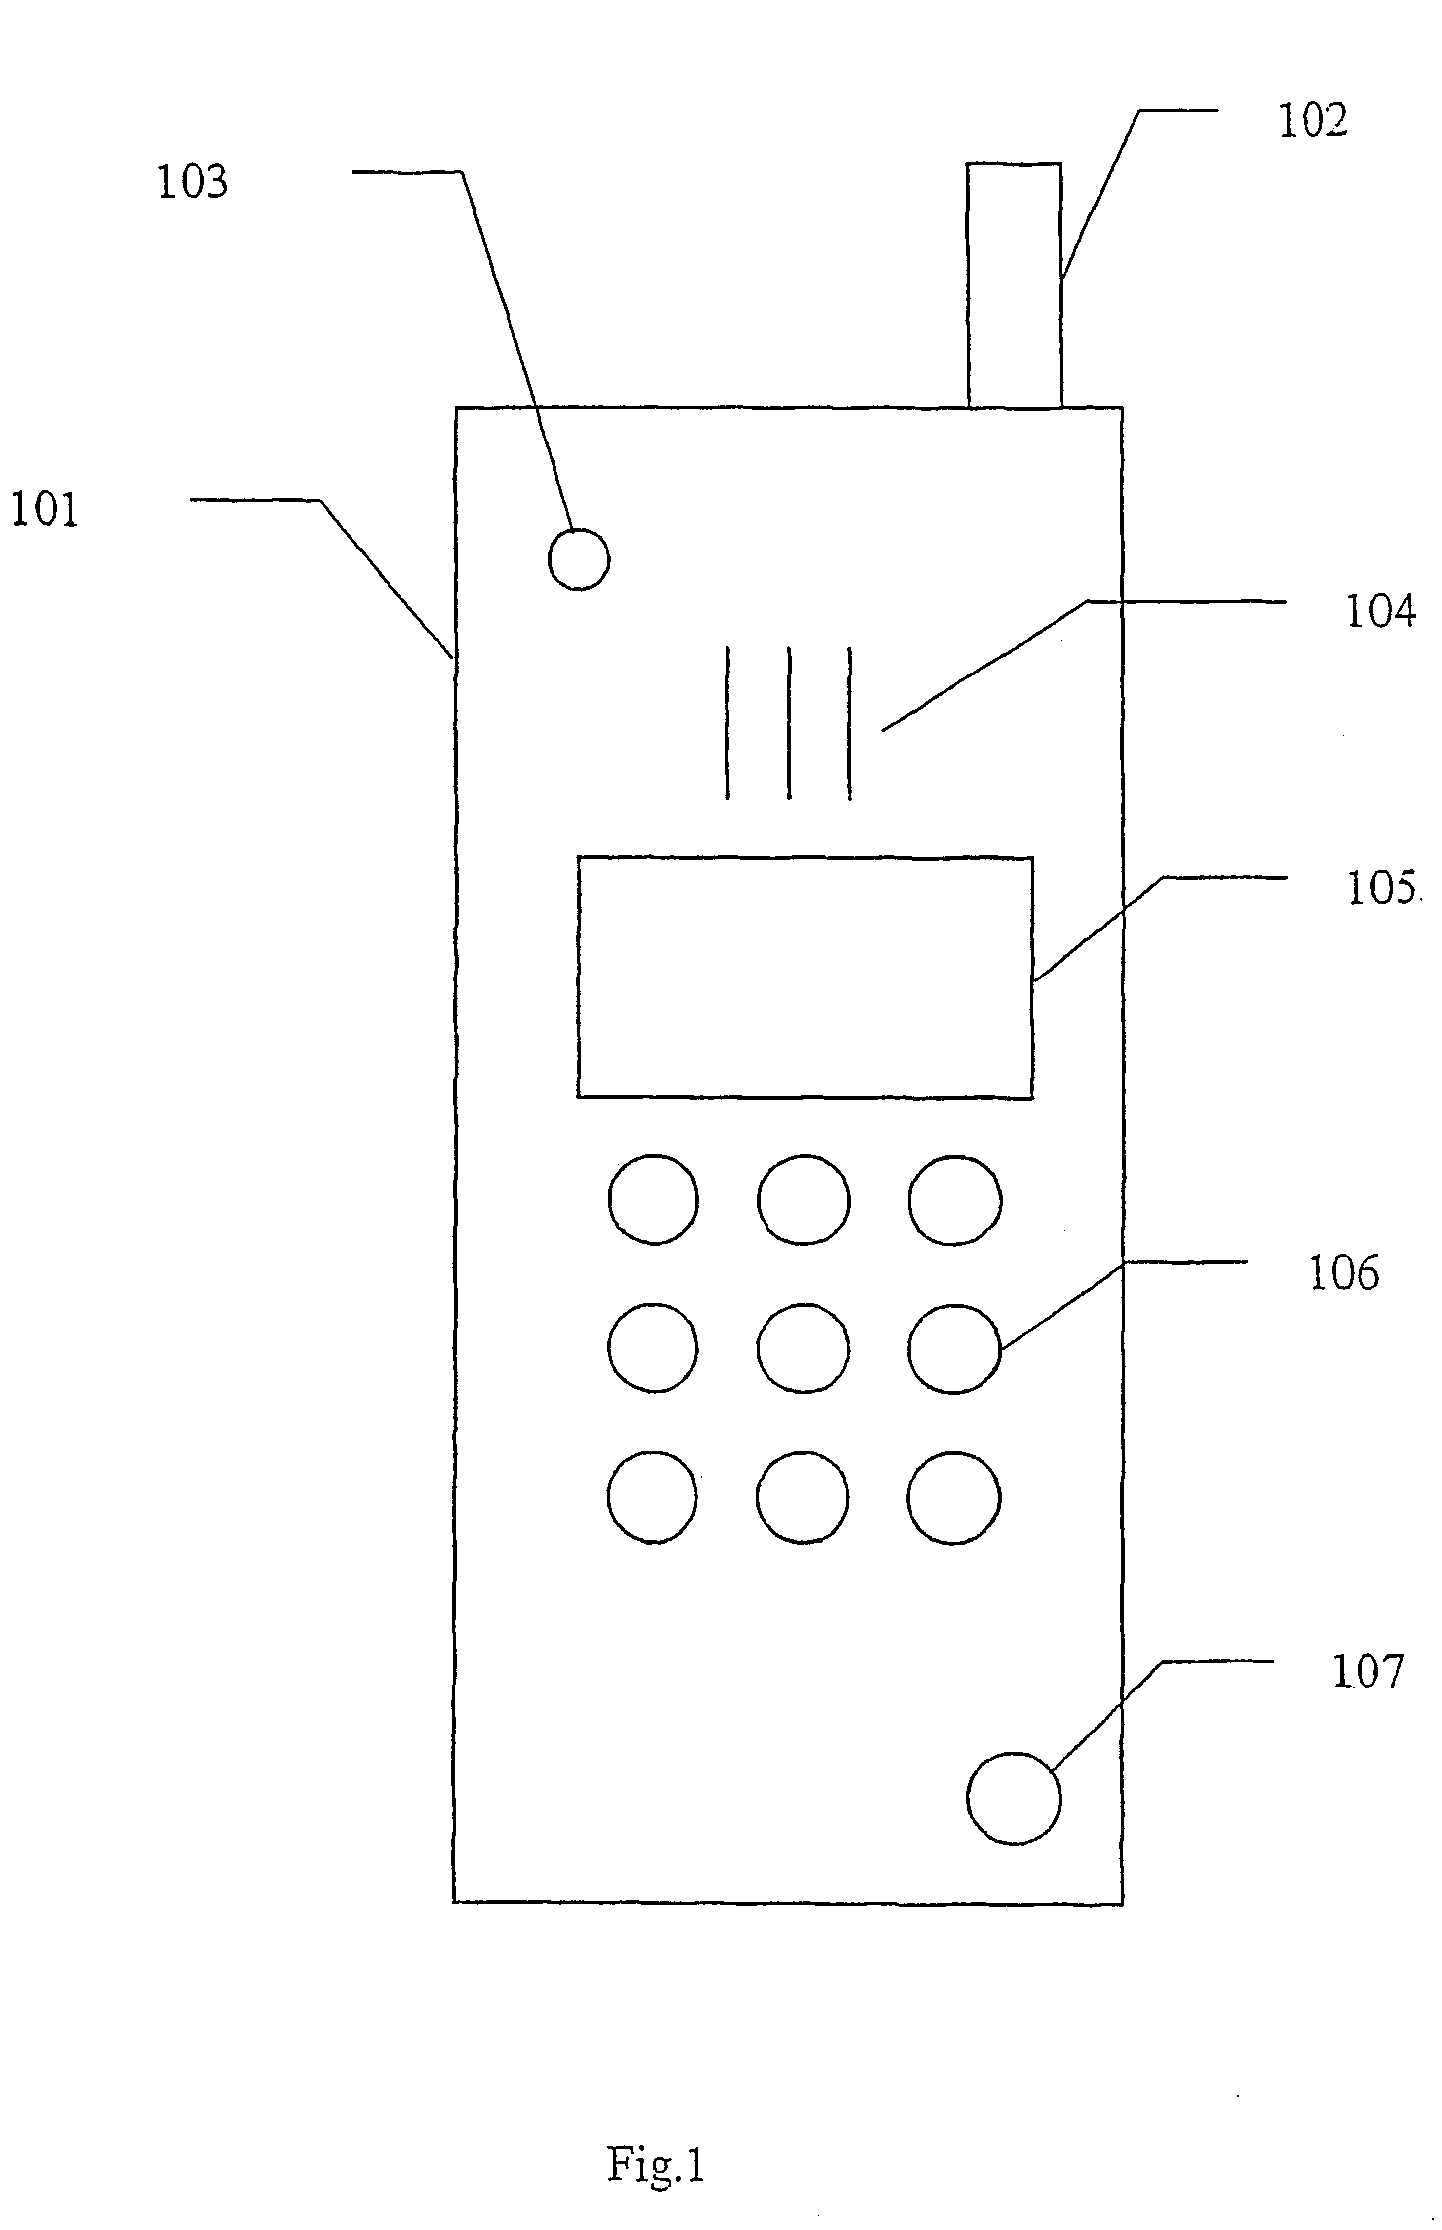 Method and arrangement for identifying and processing commands in digital images, where the user marks the command, for example by encircling it